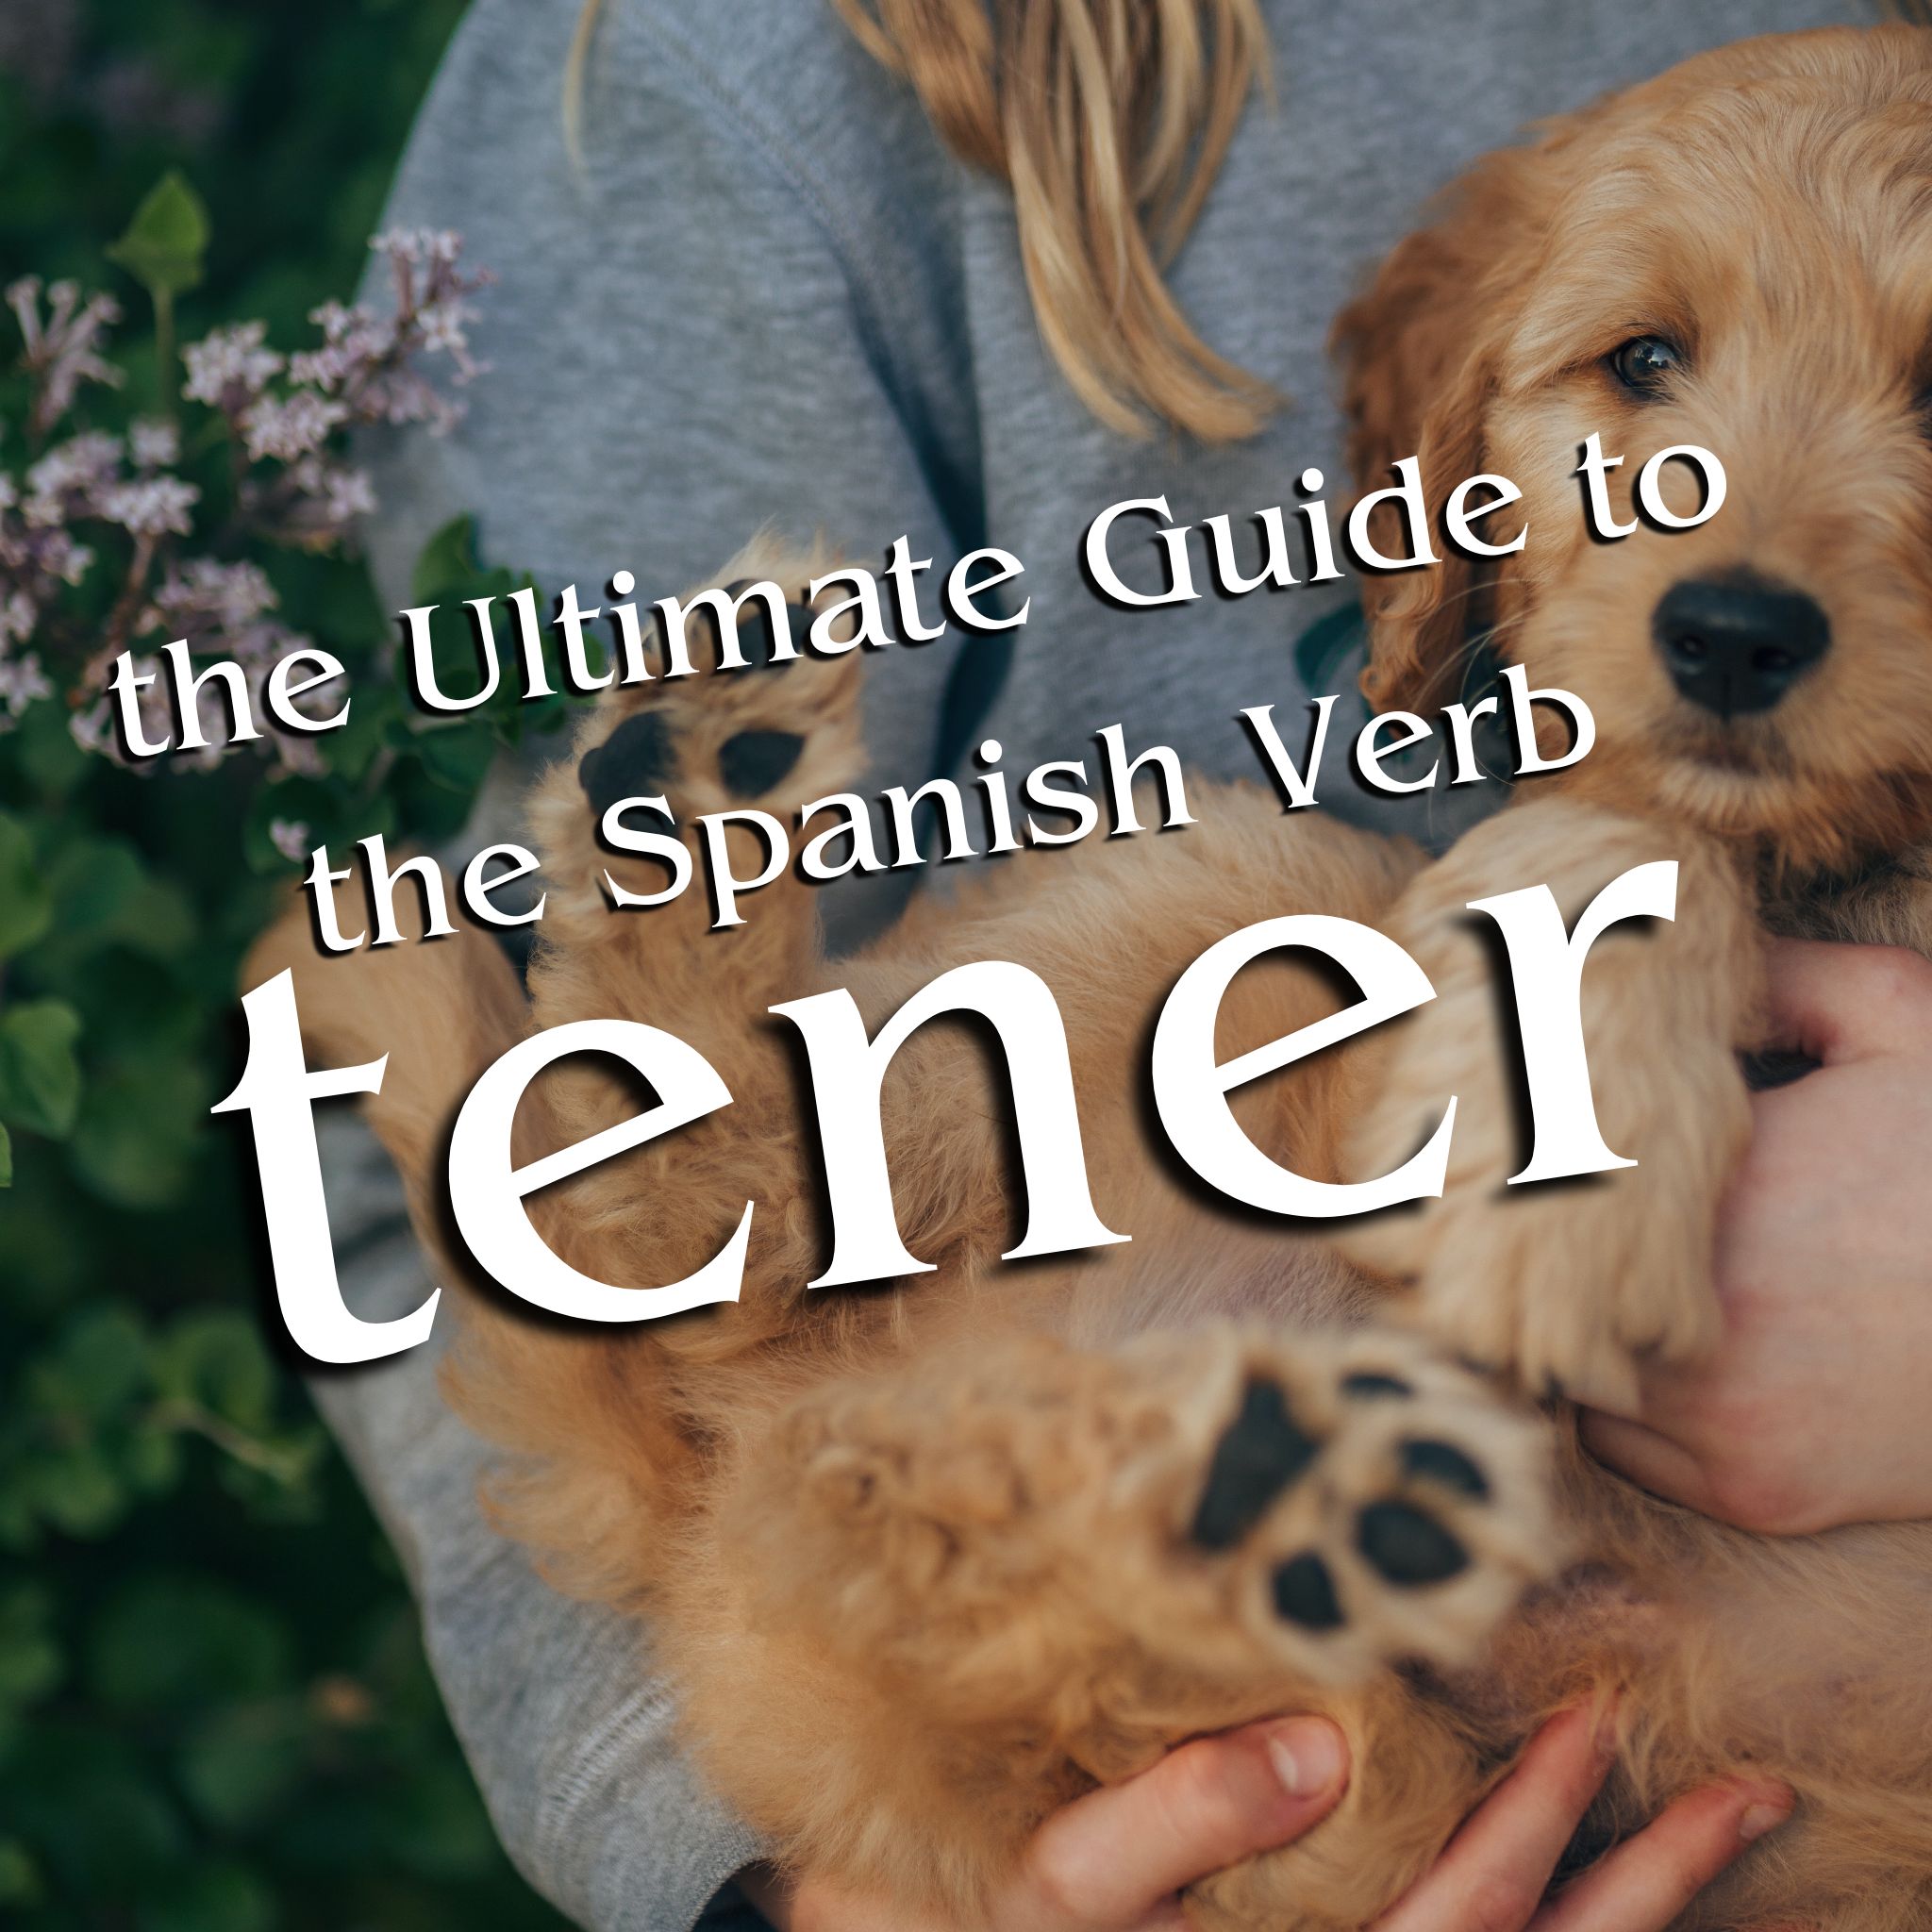 The Ultimate Guide to the Spanish Verb Tener